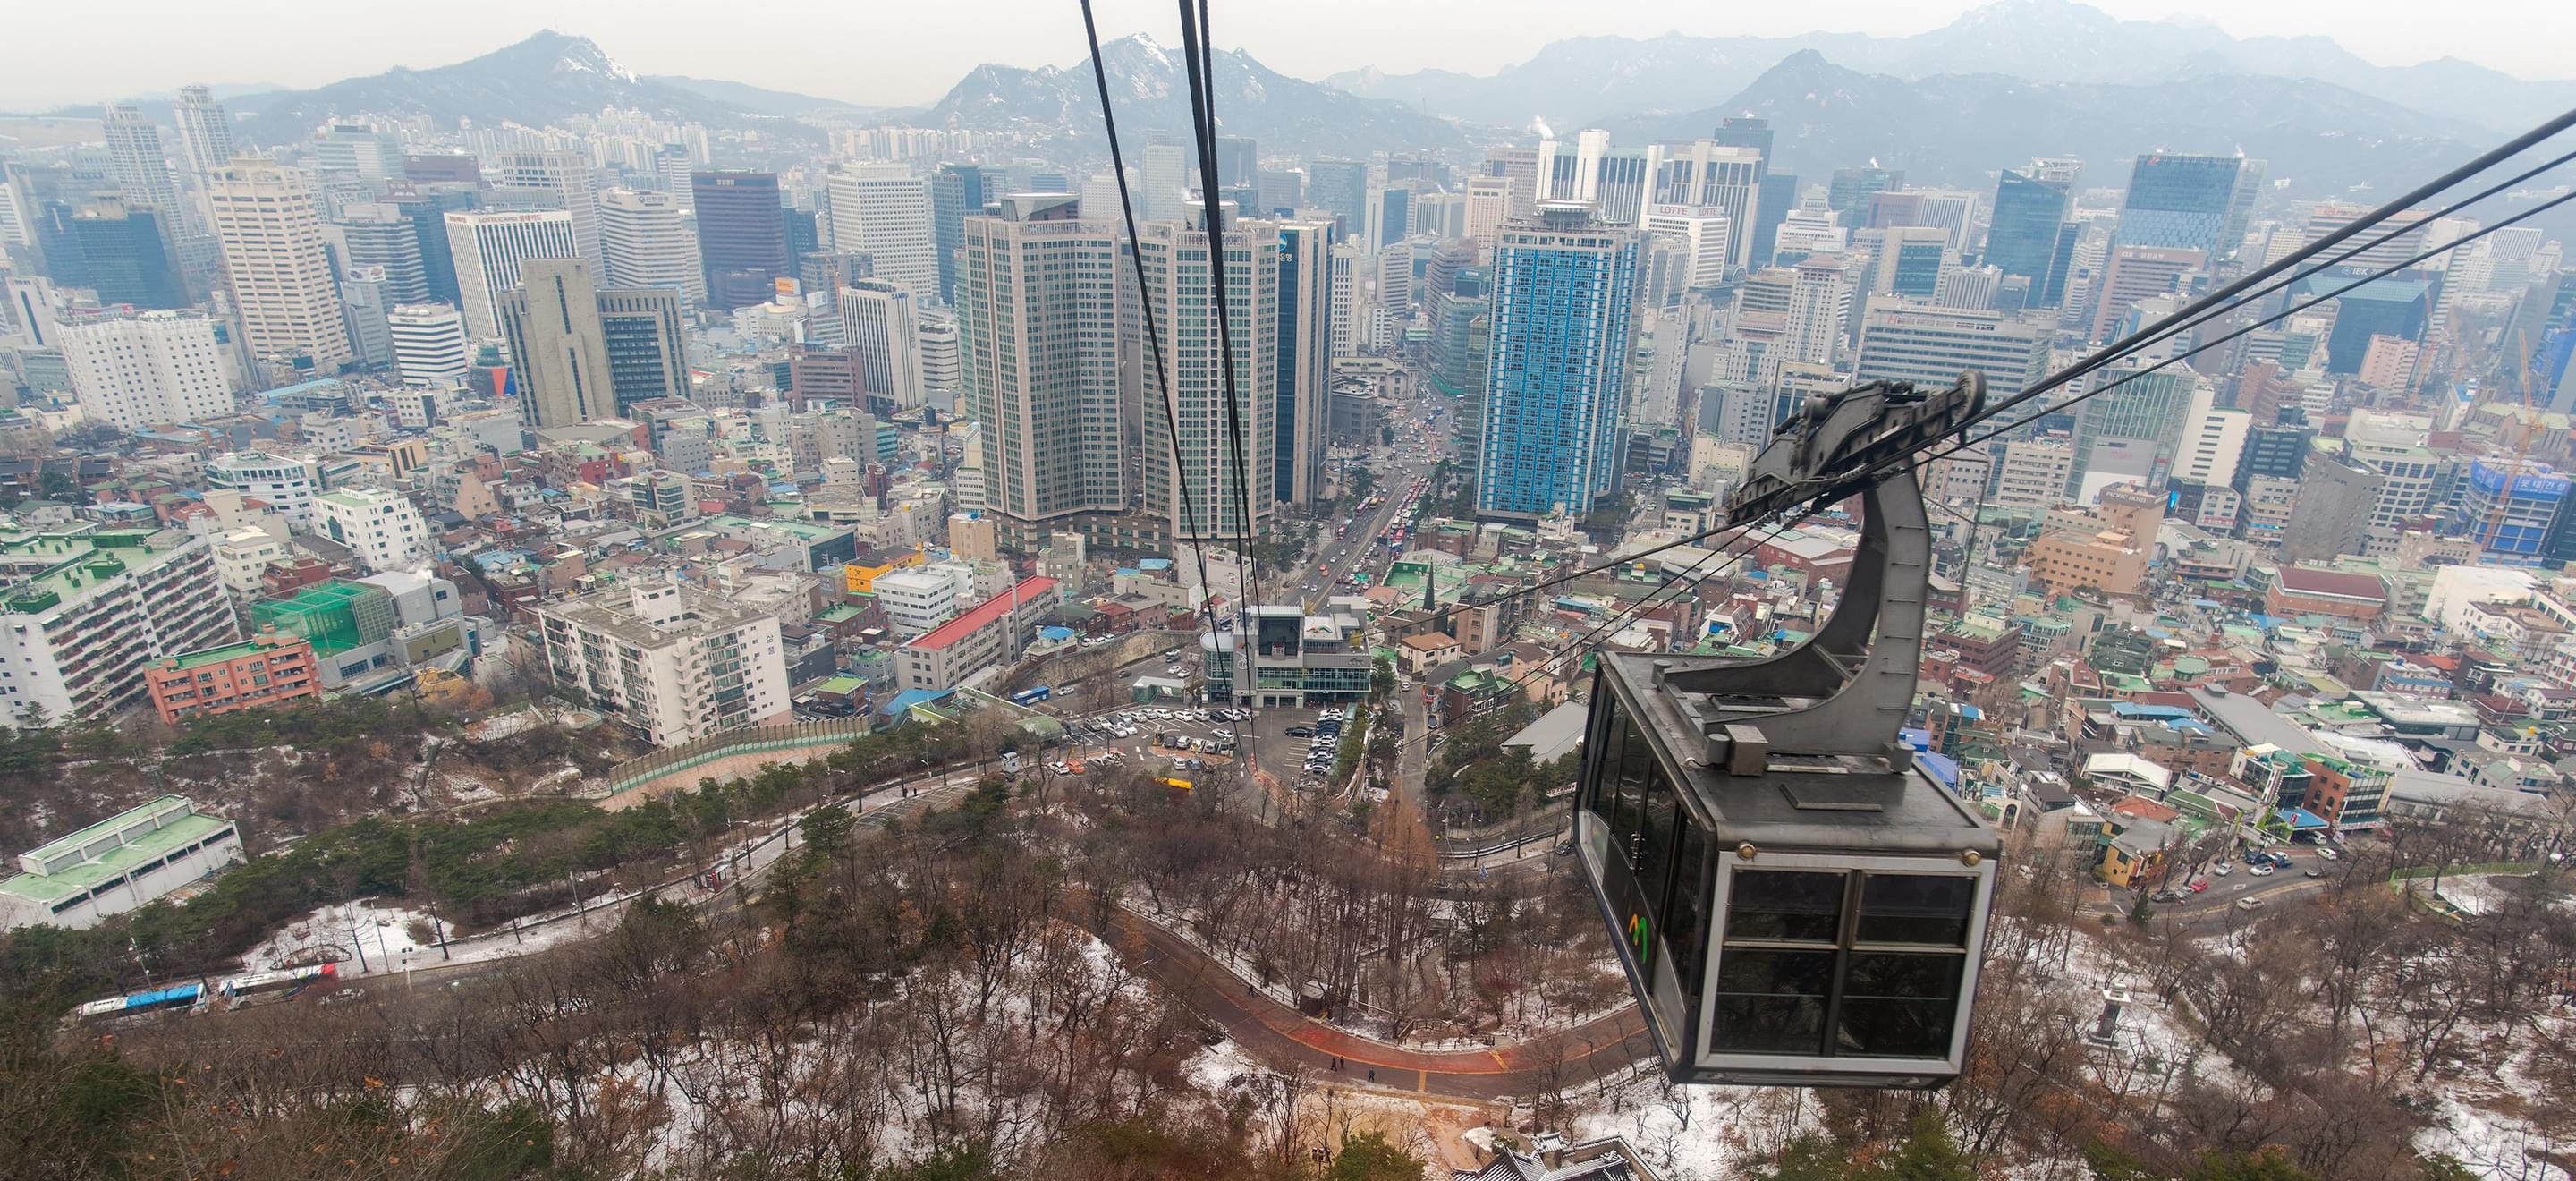 Namsan Cable Car Overview